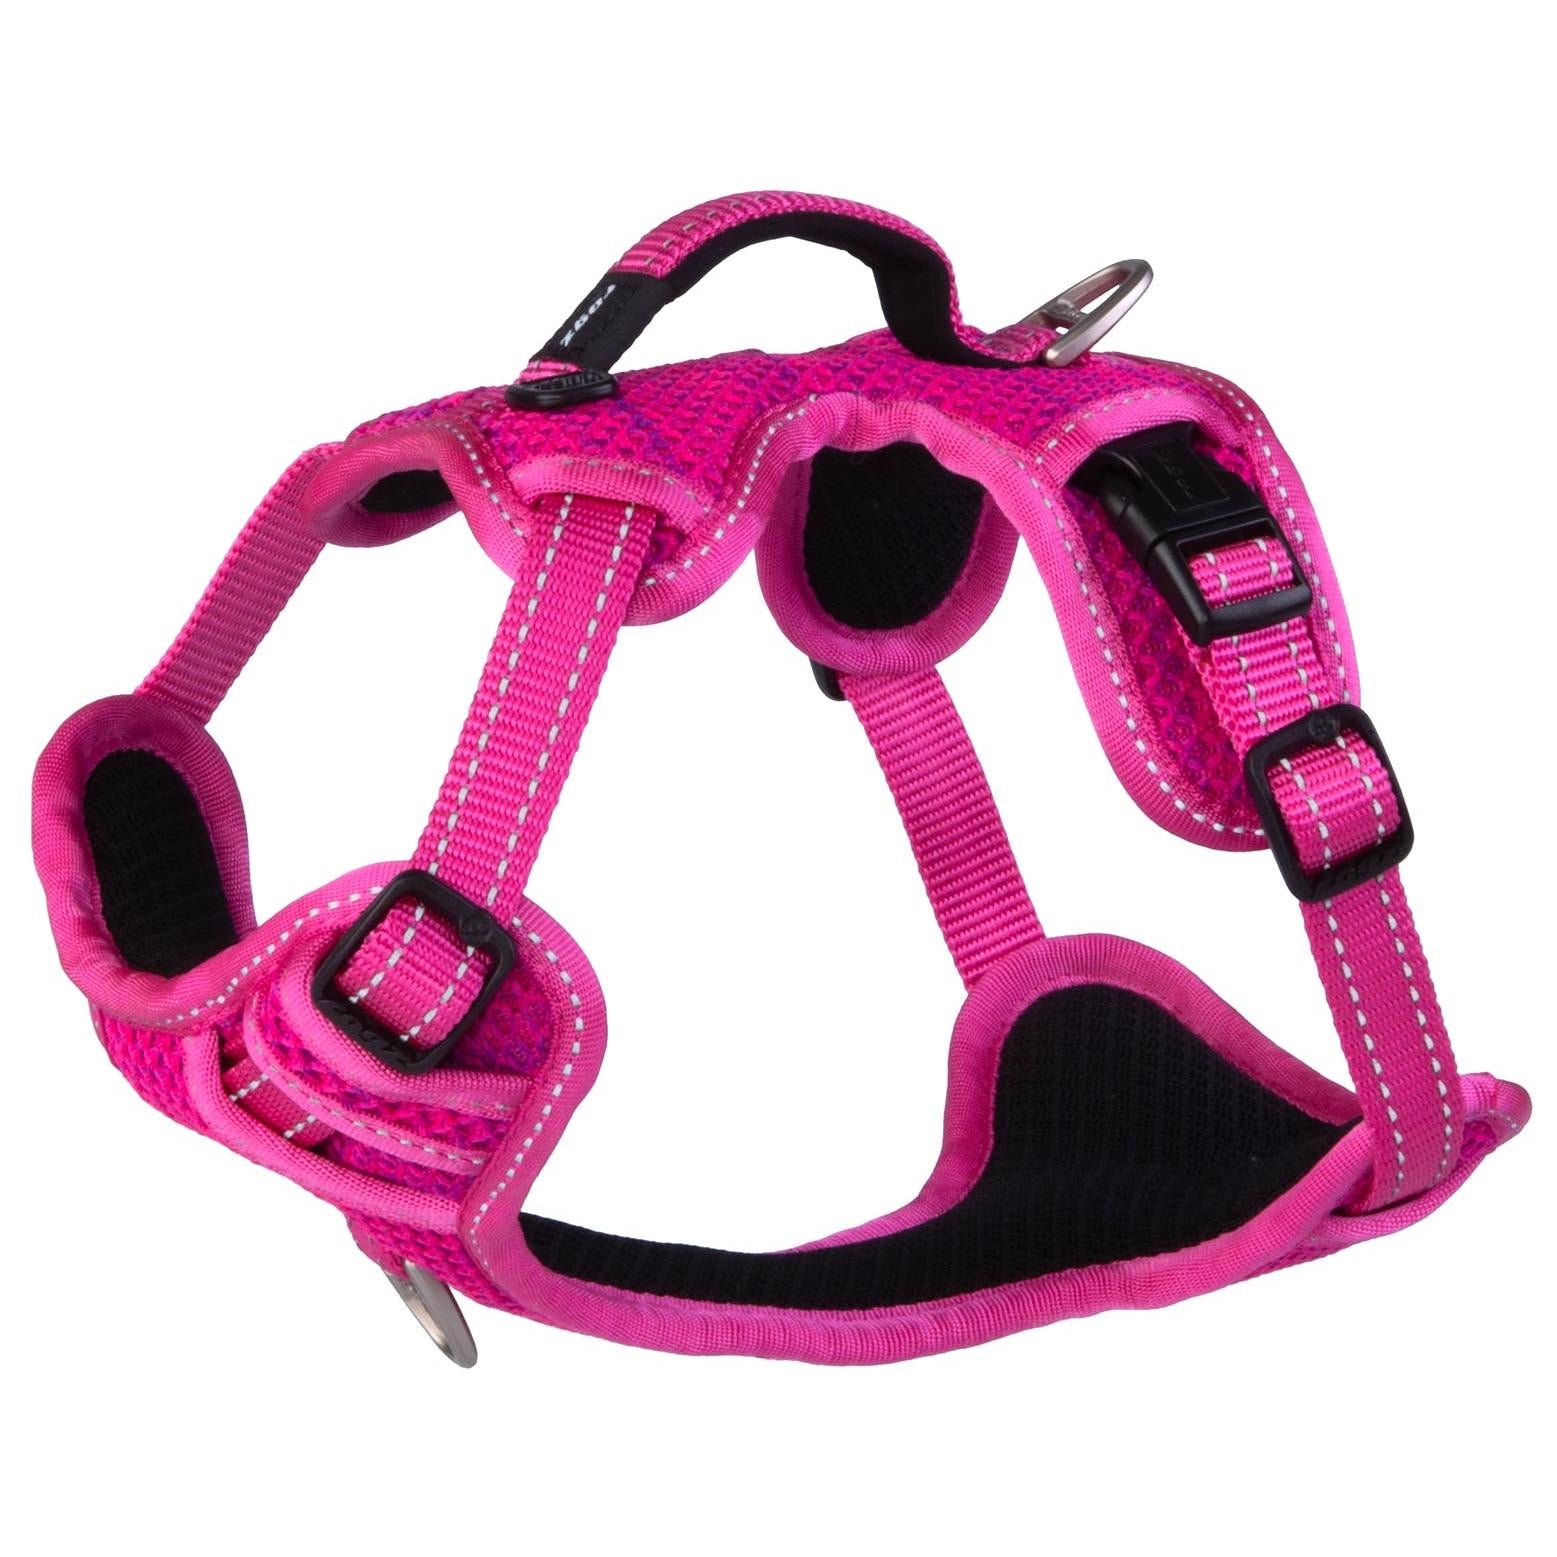 Rogz Specialty Explore Dog Harness (100000021828) [Pink]